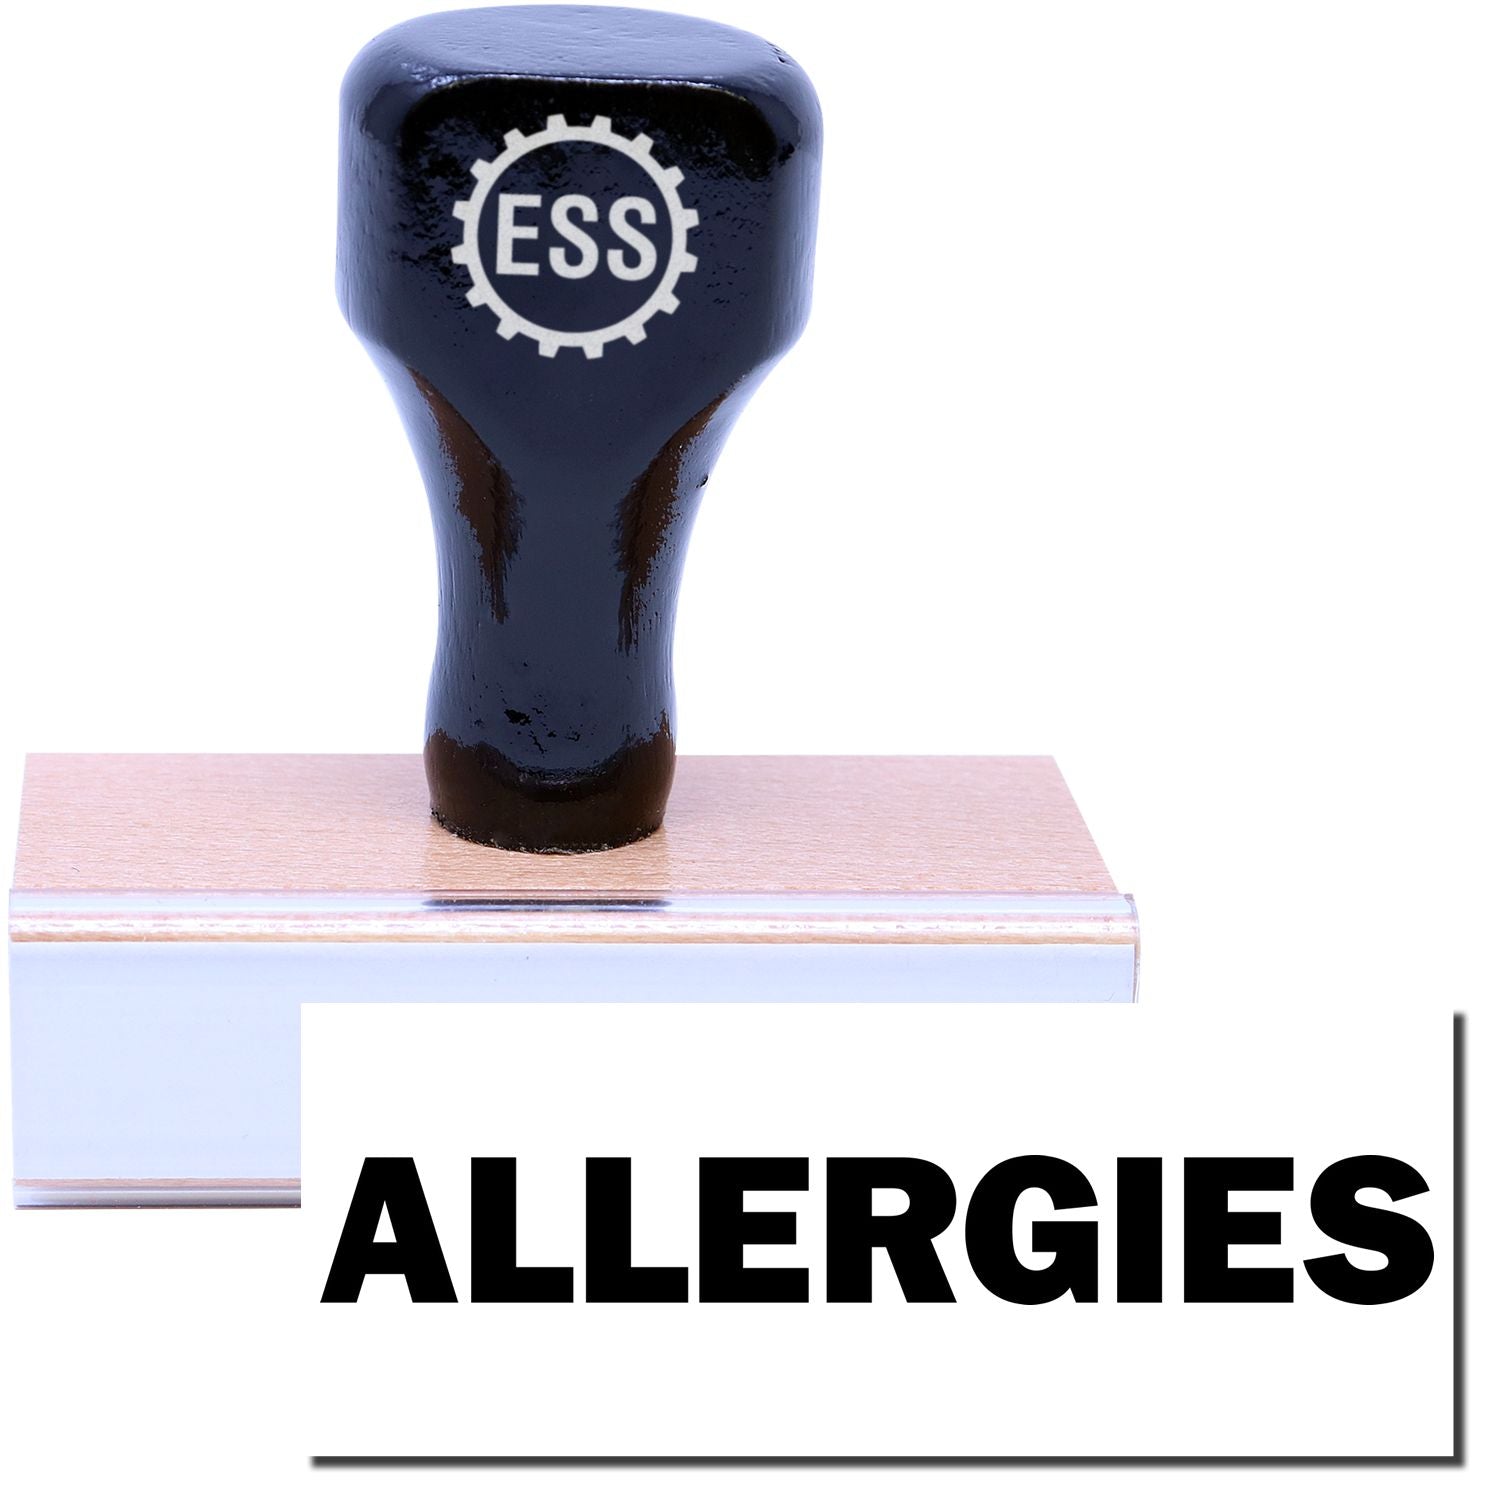 A stock office rubber stamp with a stamped image showing how the text "ALLERGIES" is displayed after stamping.